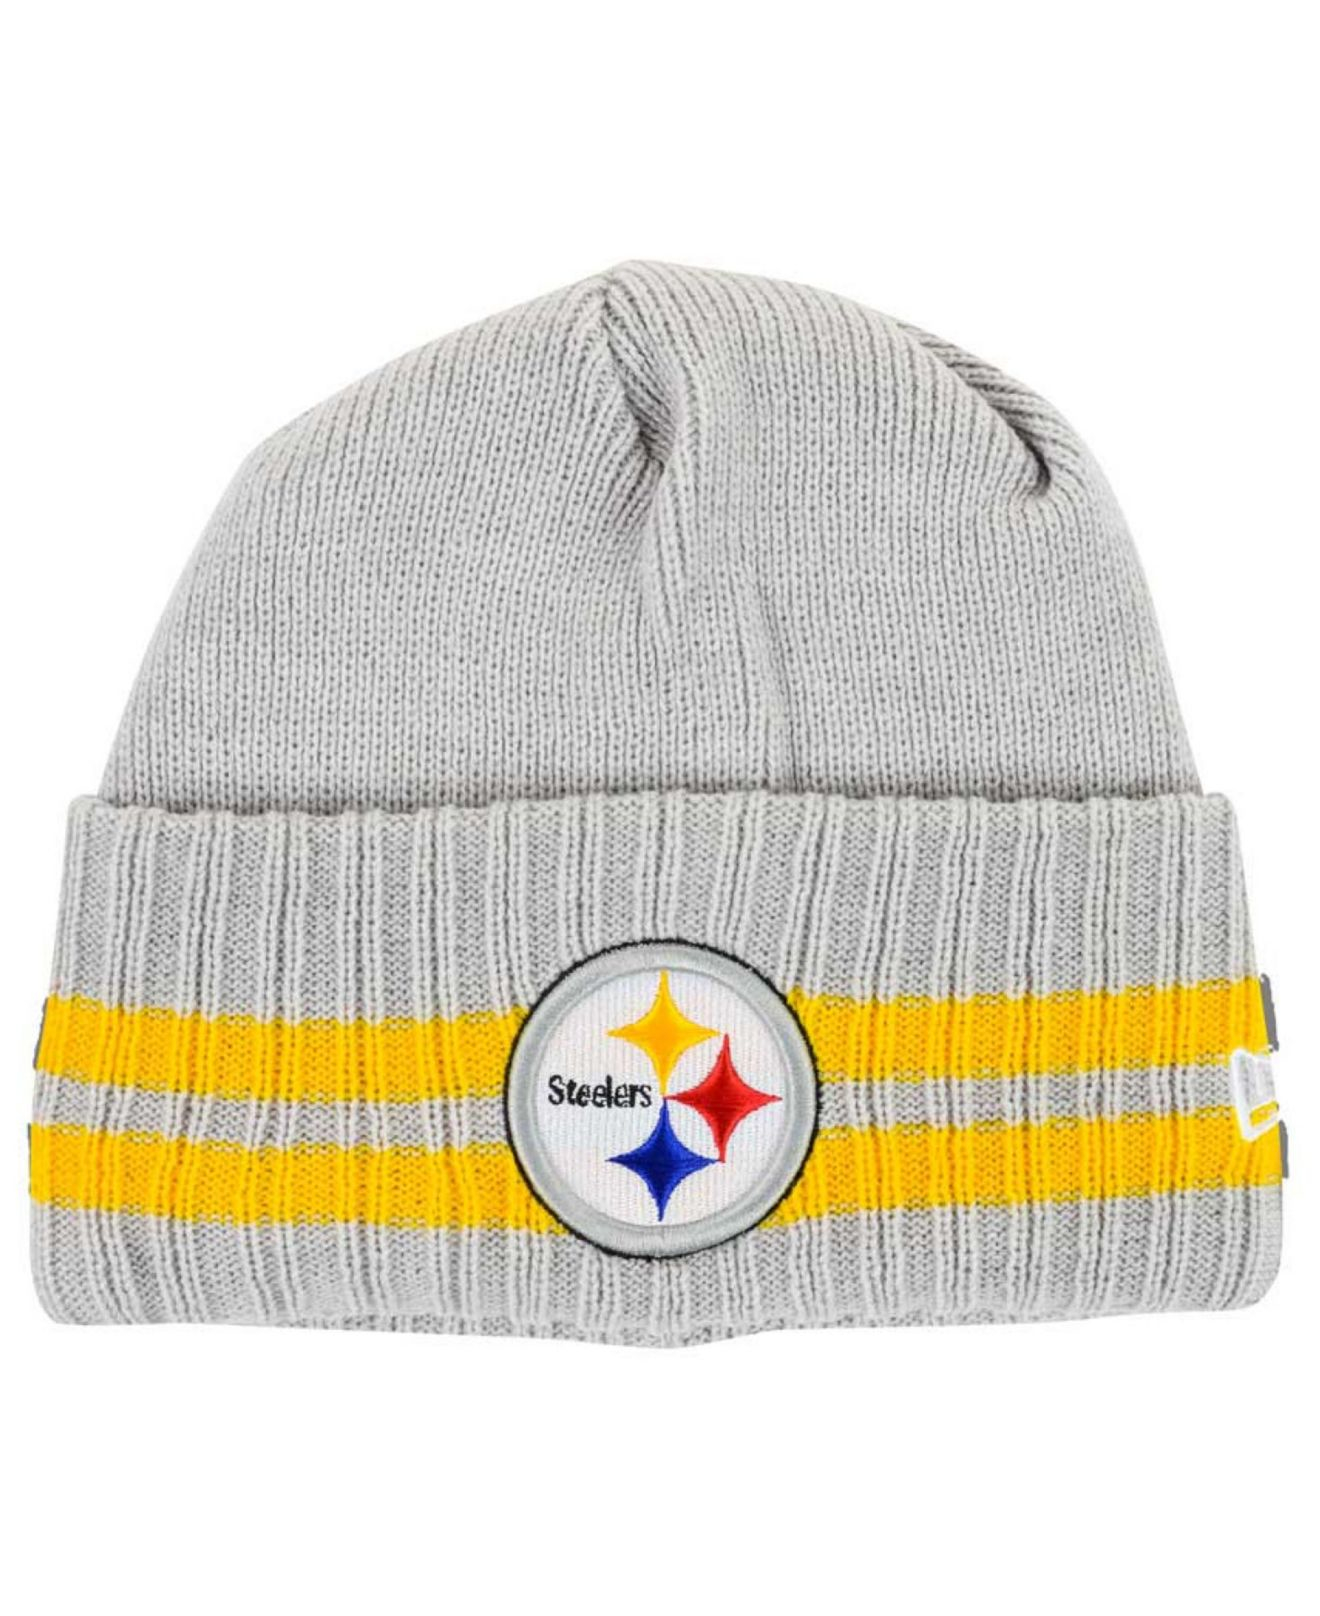 Lyst - Ktz Pittsburgh Steelers Striped Cuff Knit Hat in Gray for Men